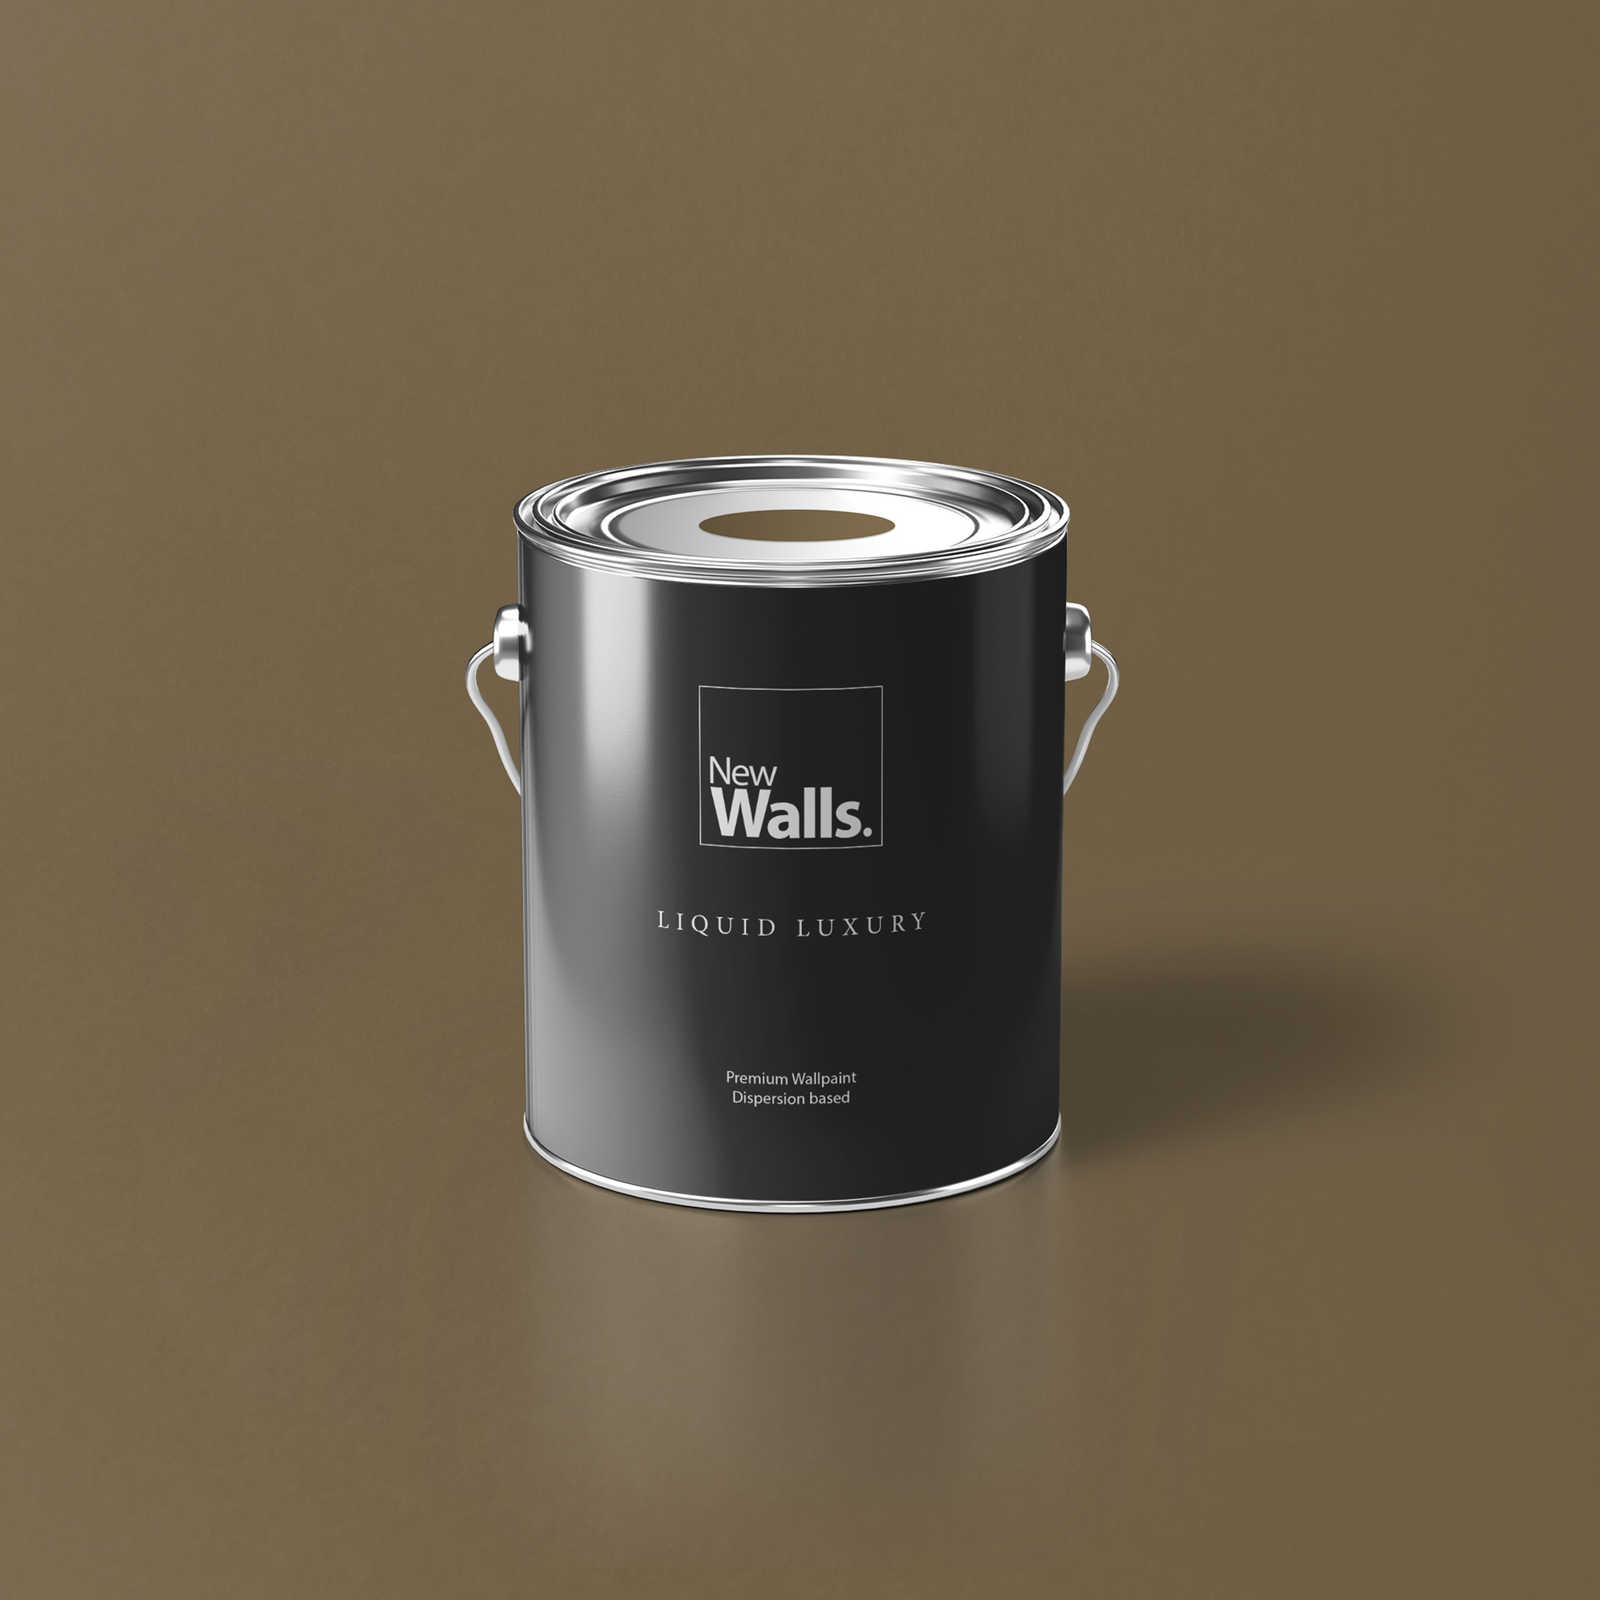 Premium Wall Paint Friendly Brown »Essential Earth« NW712 – 2.5 litre
